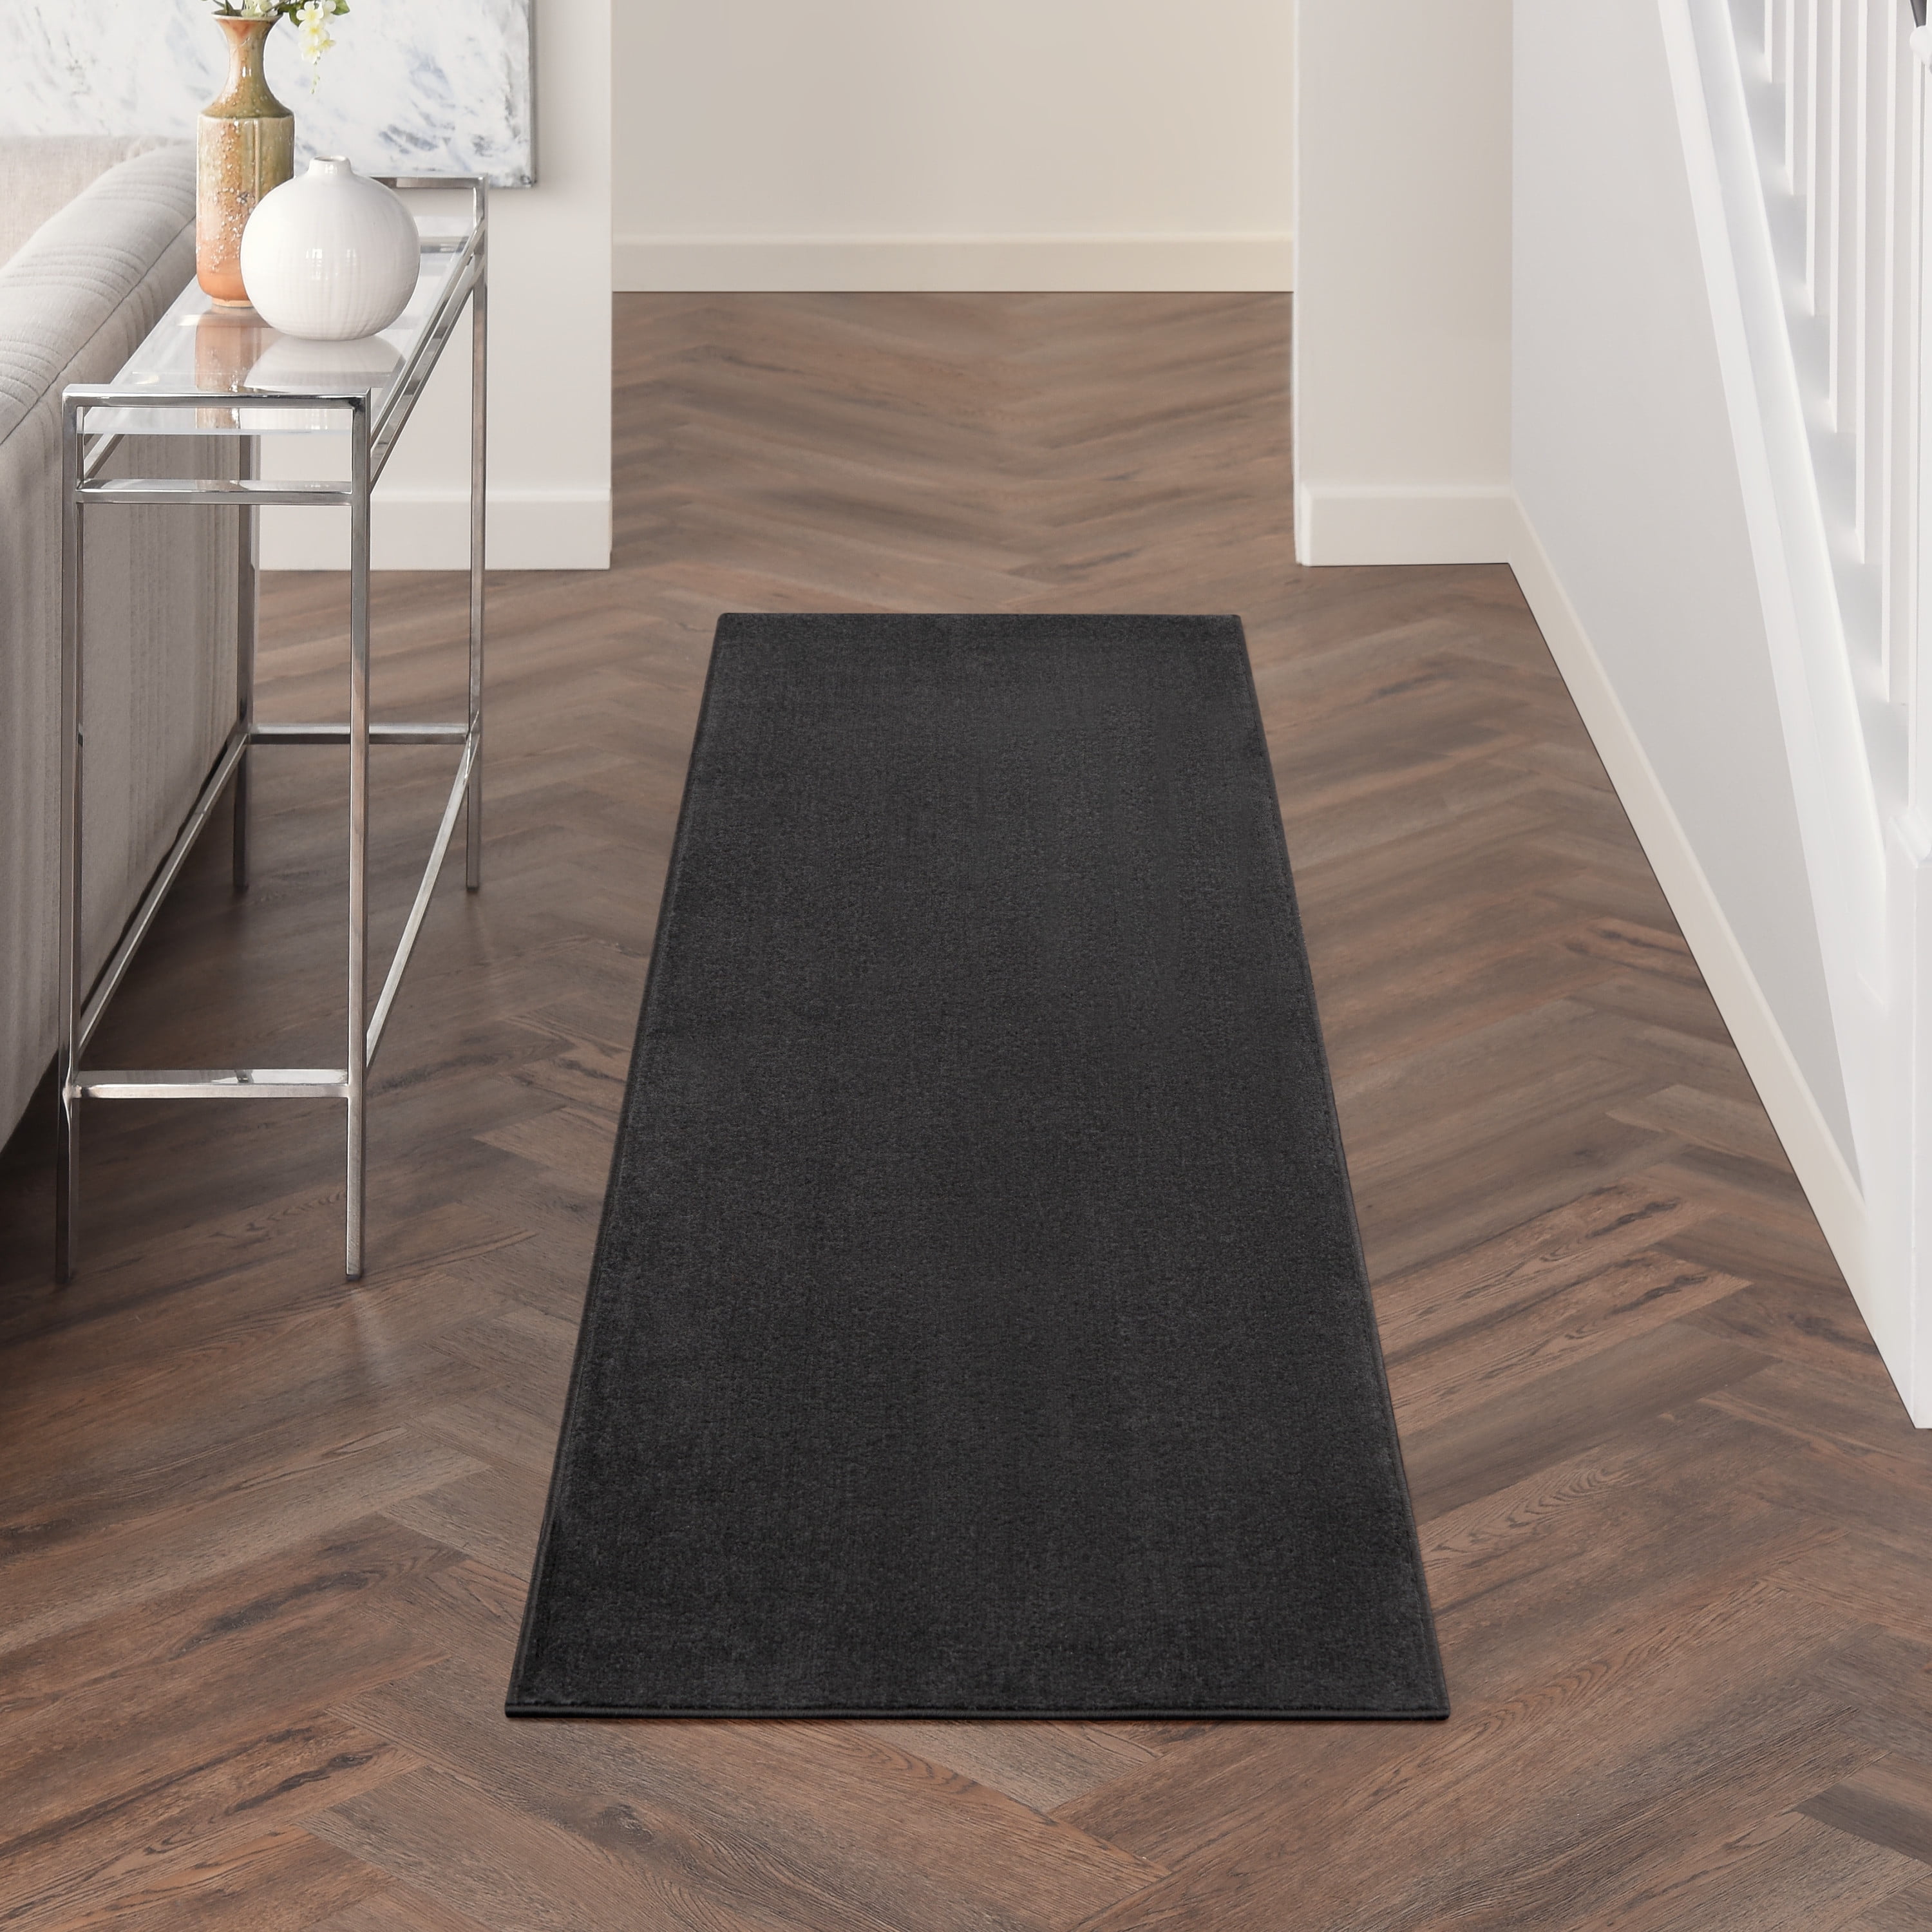  Custom Size Runner Rug 2 ft x 6 ft, ZGR Carpet Runners Hallway  Entryway Kitchen Garage Laundry Room Area Rugs with Non-Slip Rubber  Backing, Gray with Black Stripe : Home 